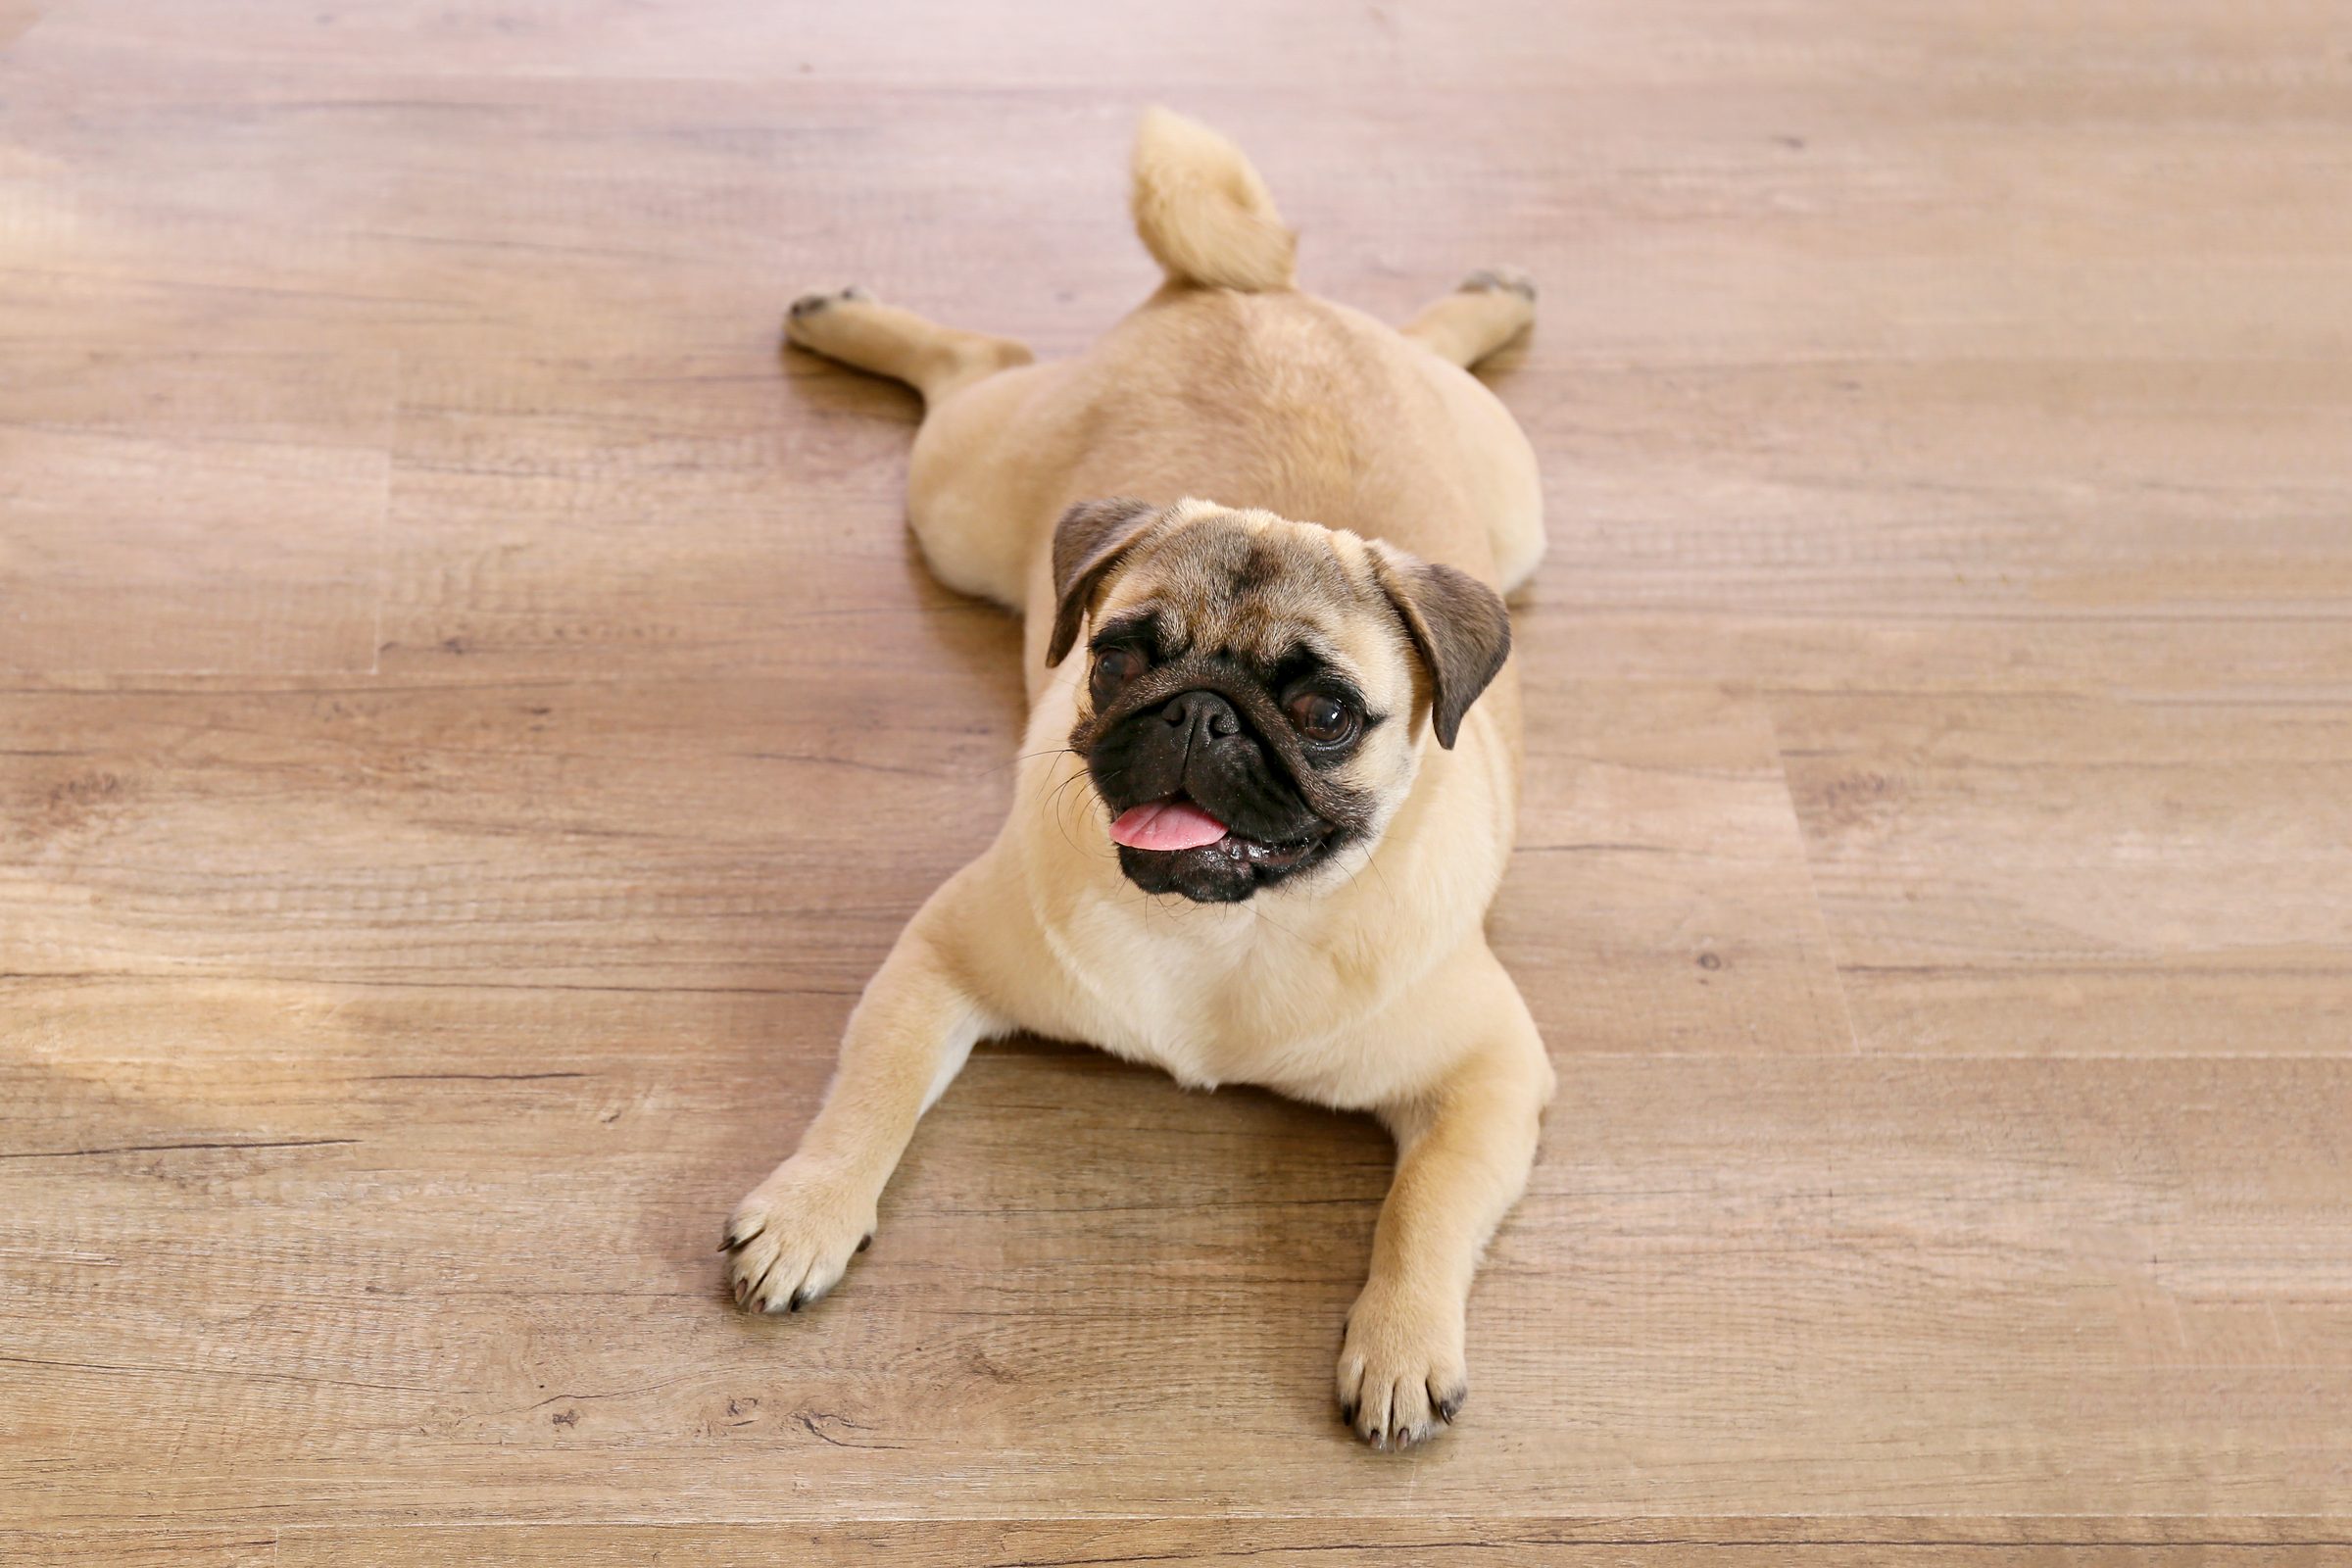 How To Choose the Best Flooring for Dogs